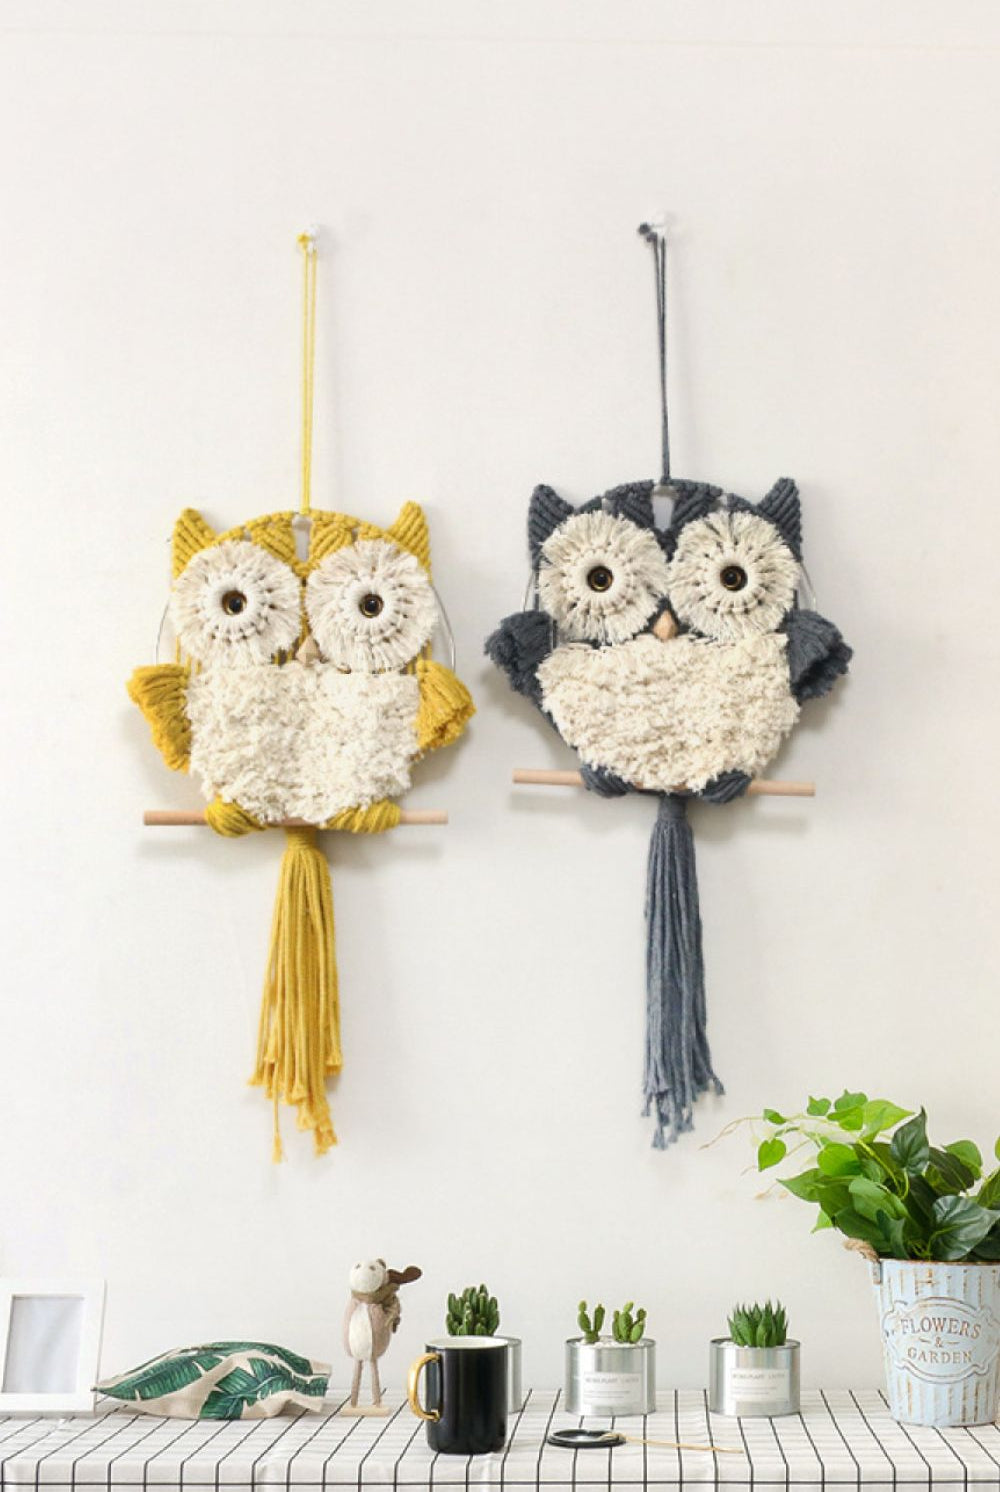 Antique White Hand-Woven Tassel Owl Macrame Wall Hanging Home